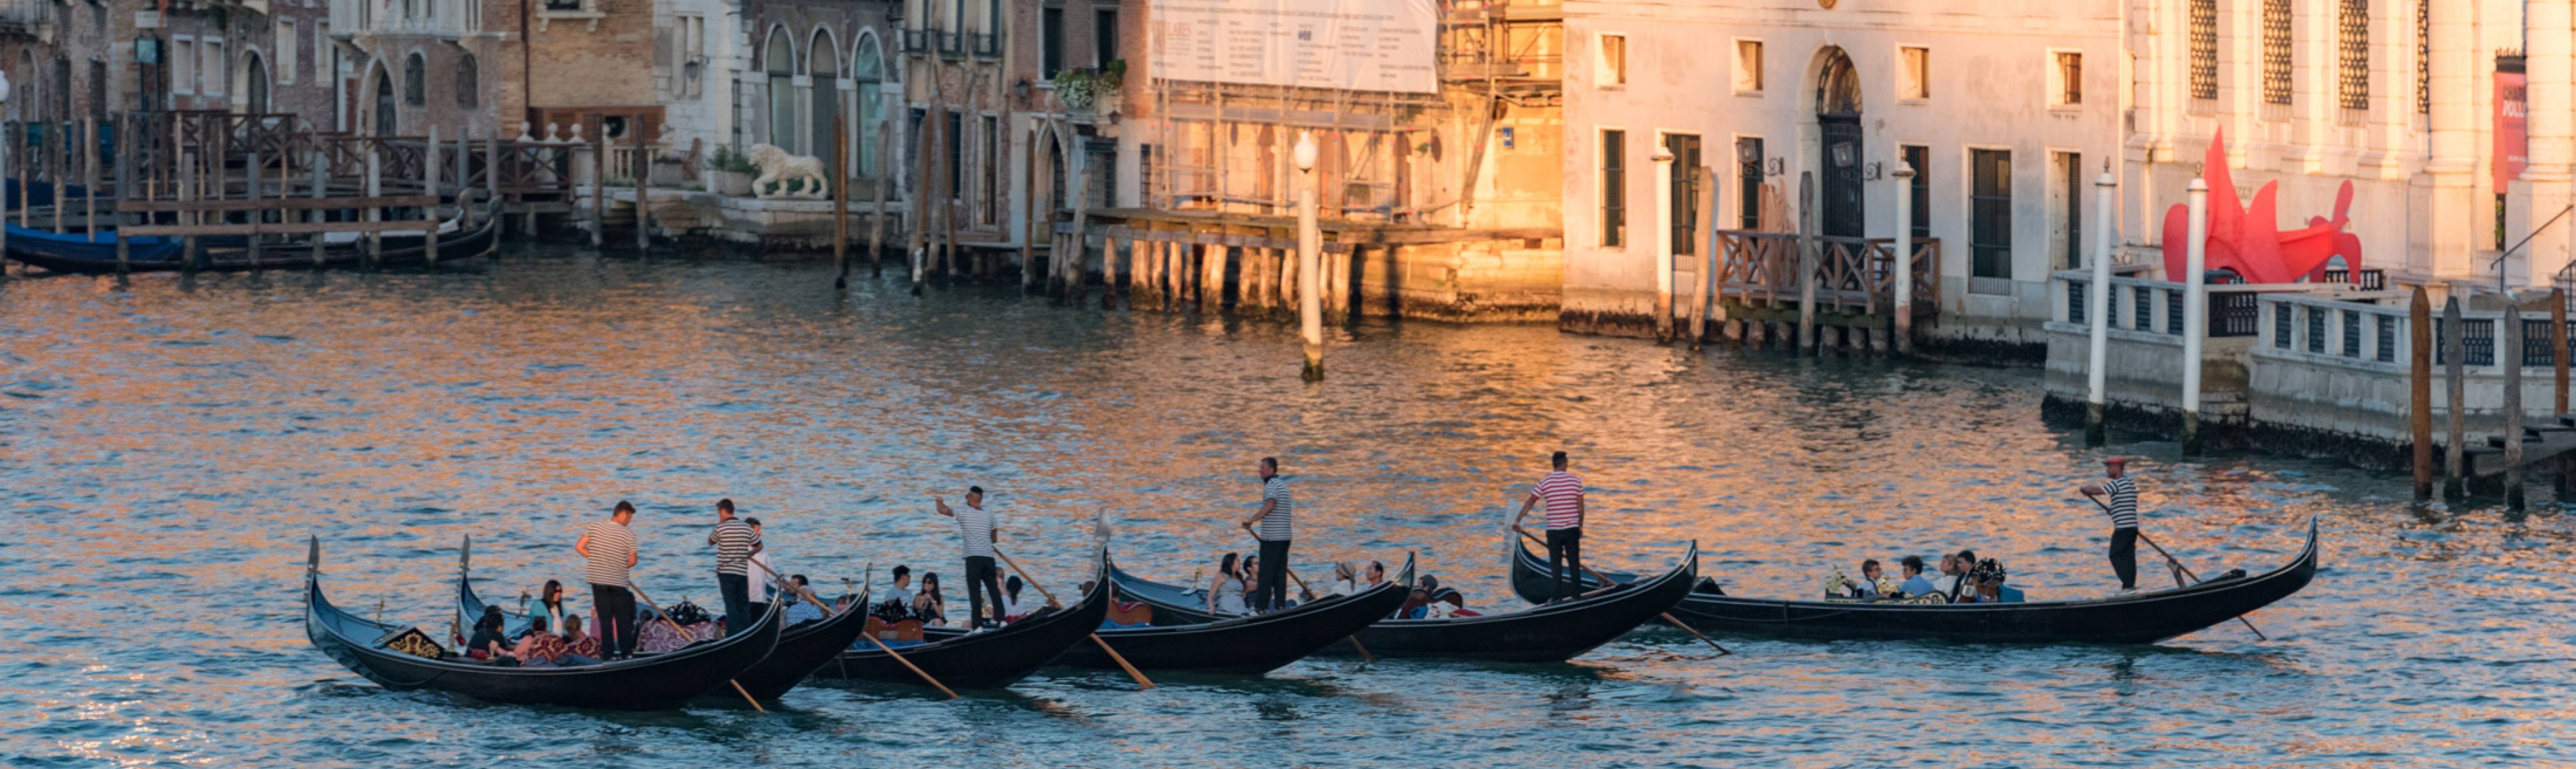 Sunset view of passenger-filled gondolas crossing the Grand Canal